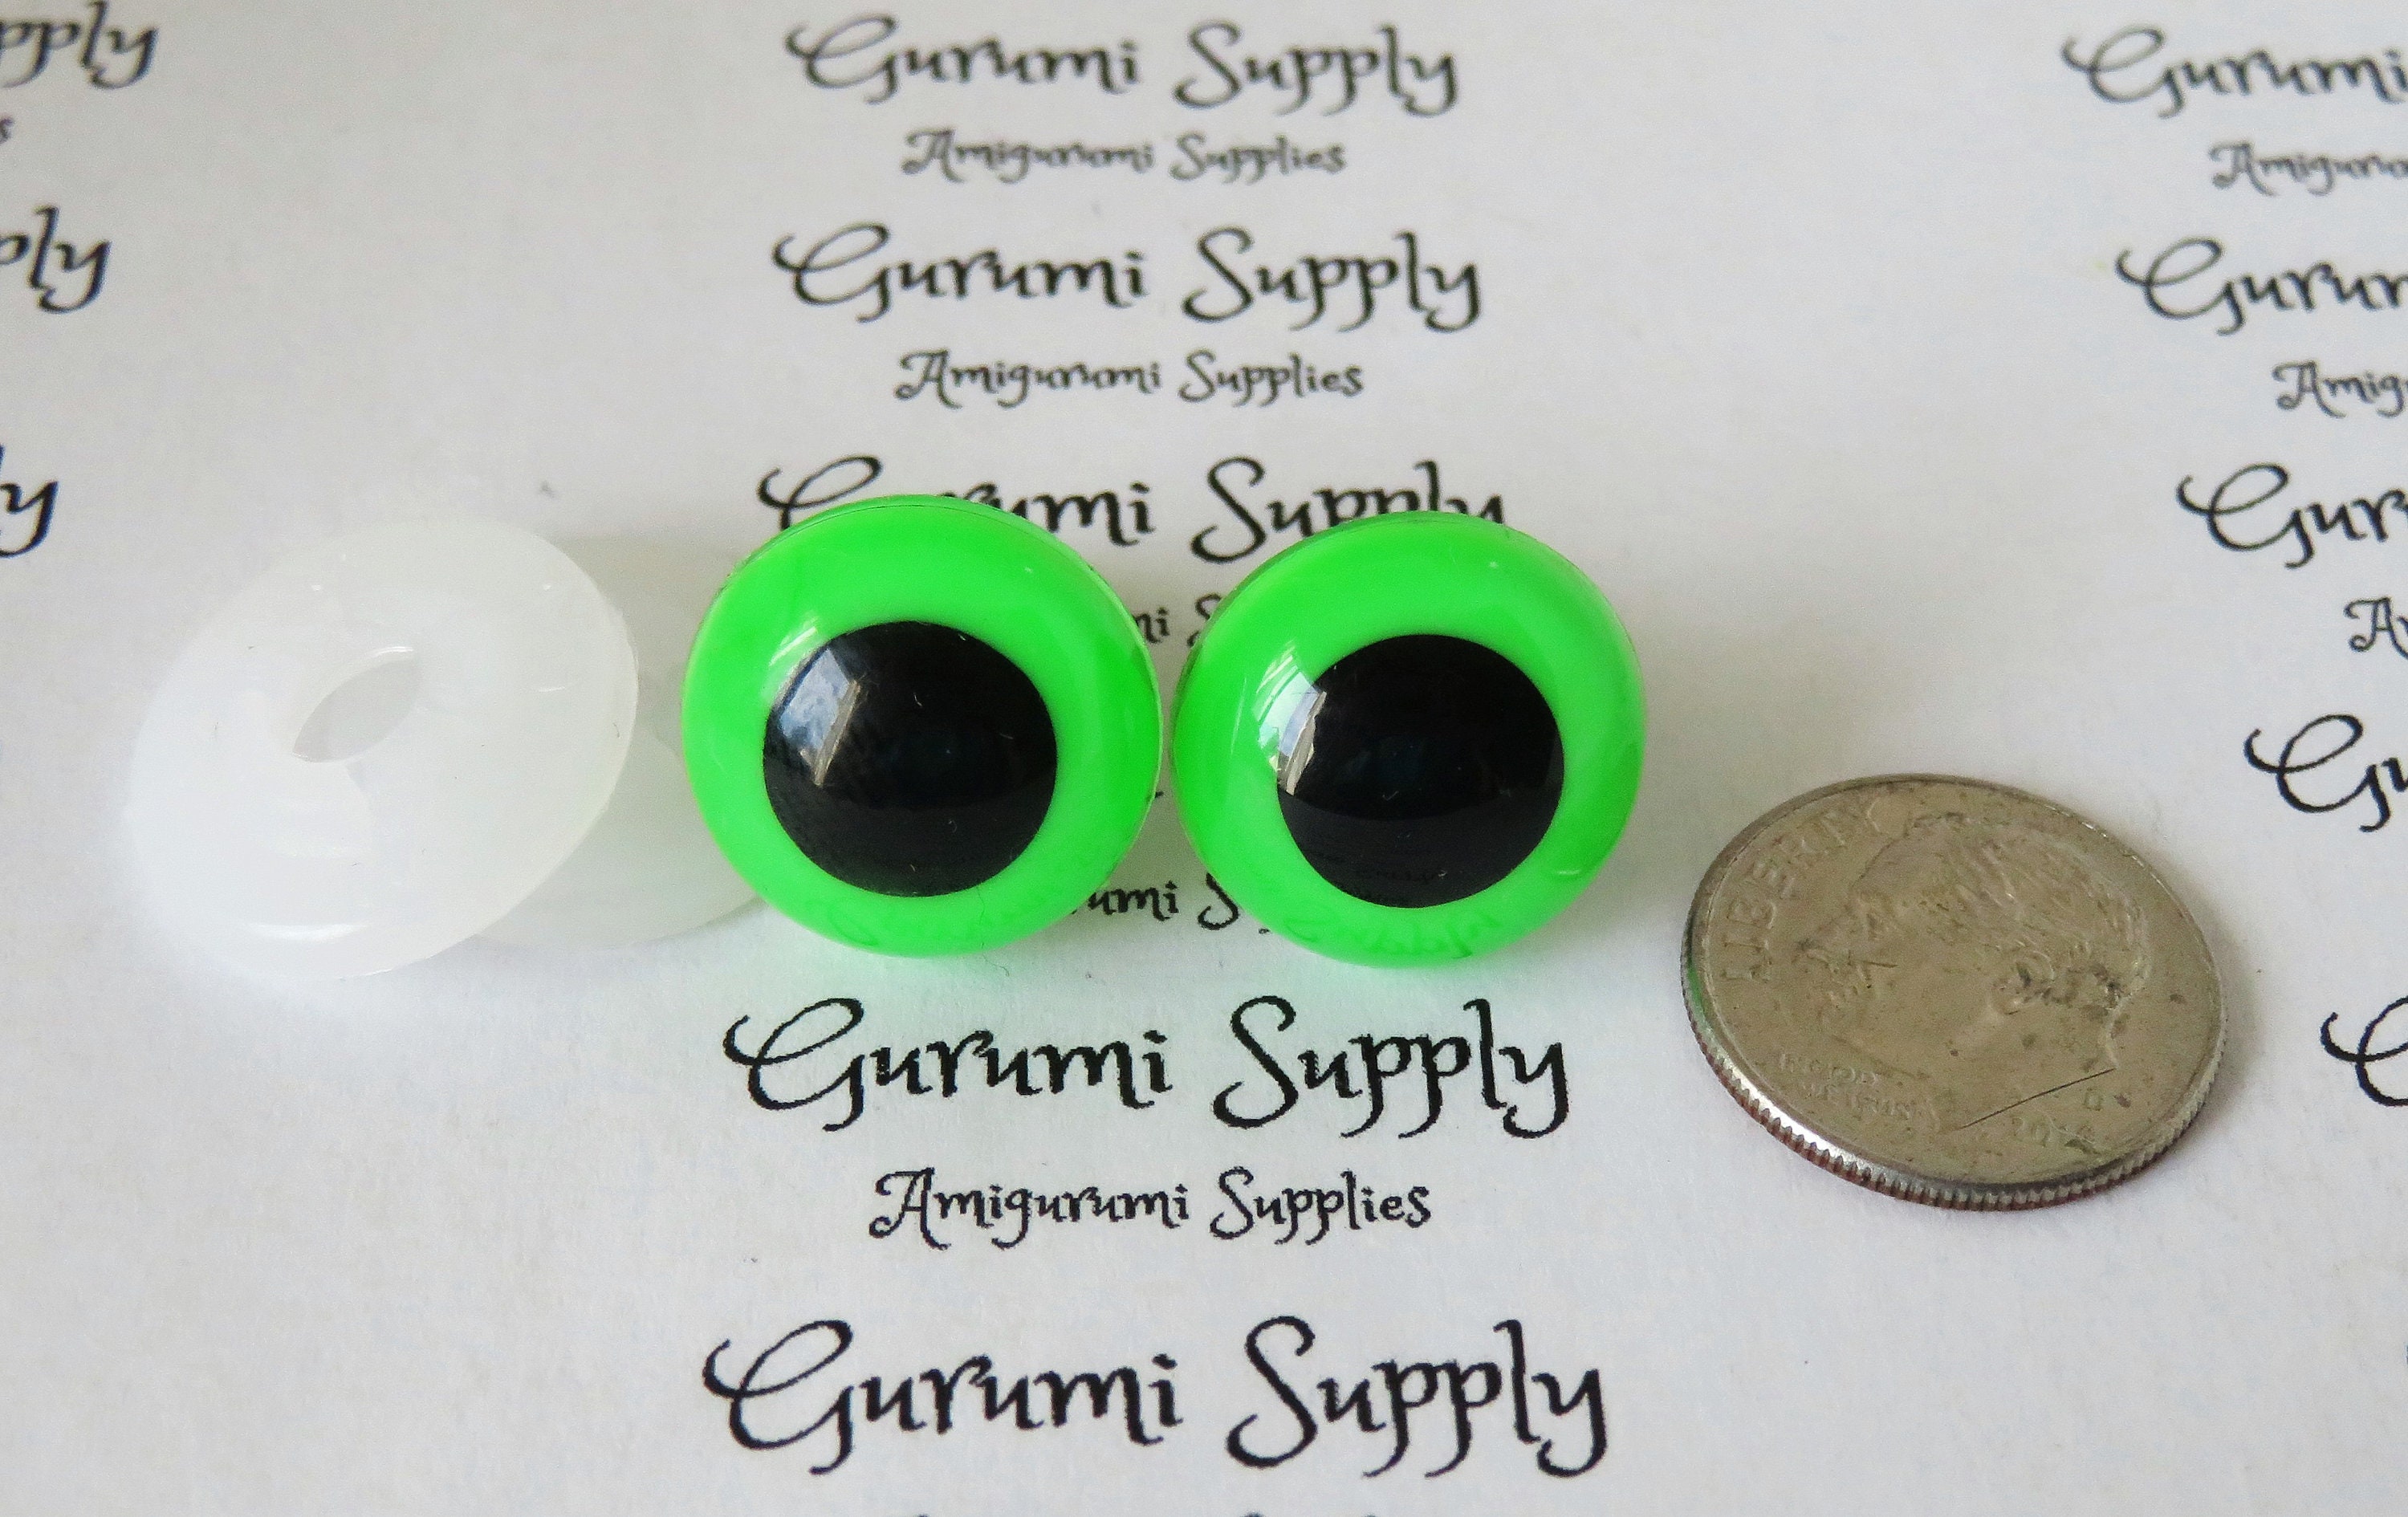 15mm Neon Green Iris Black Pupil Round Safety Eyes and Washers: 2 Pairs -  Doll / Amigurumi / Animal / Creation / Plastic / Crochet / Knit